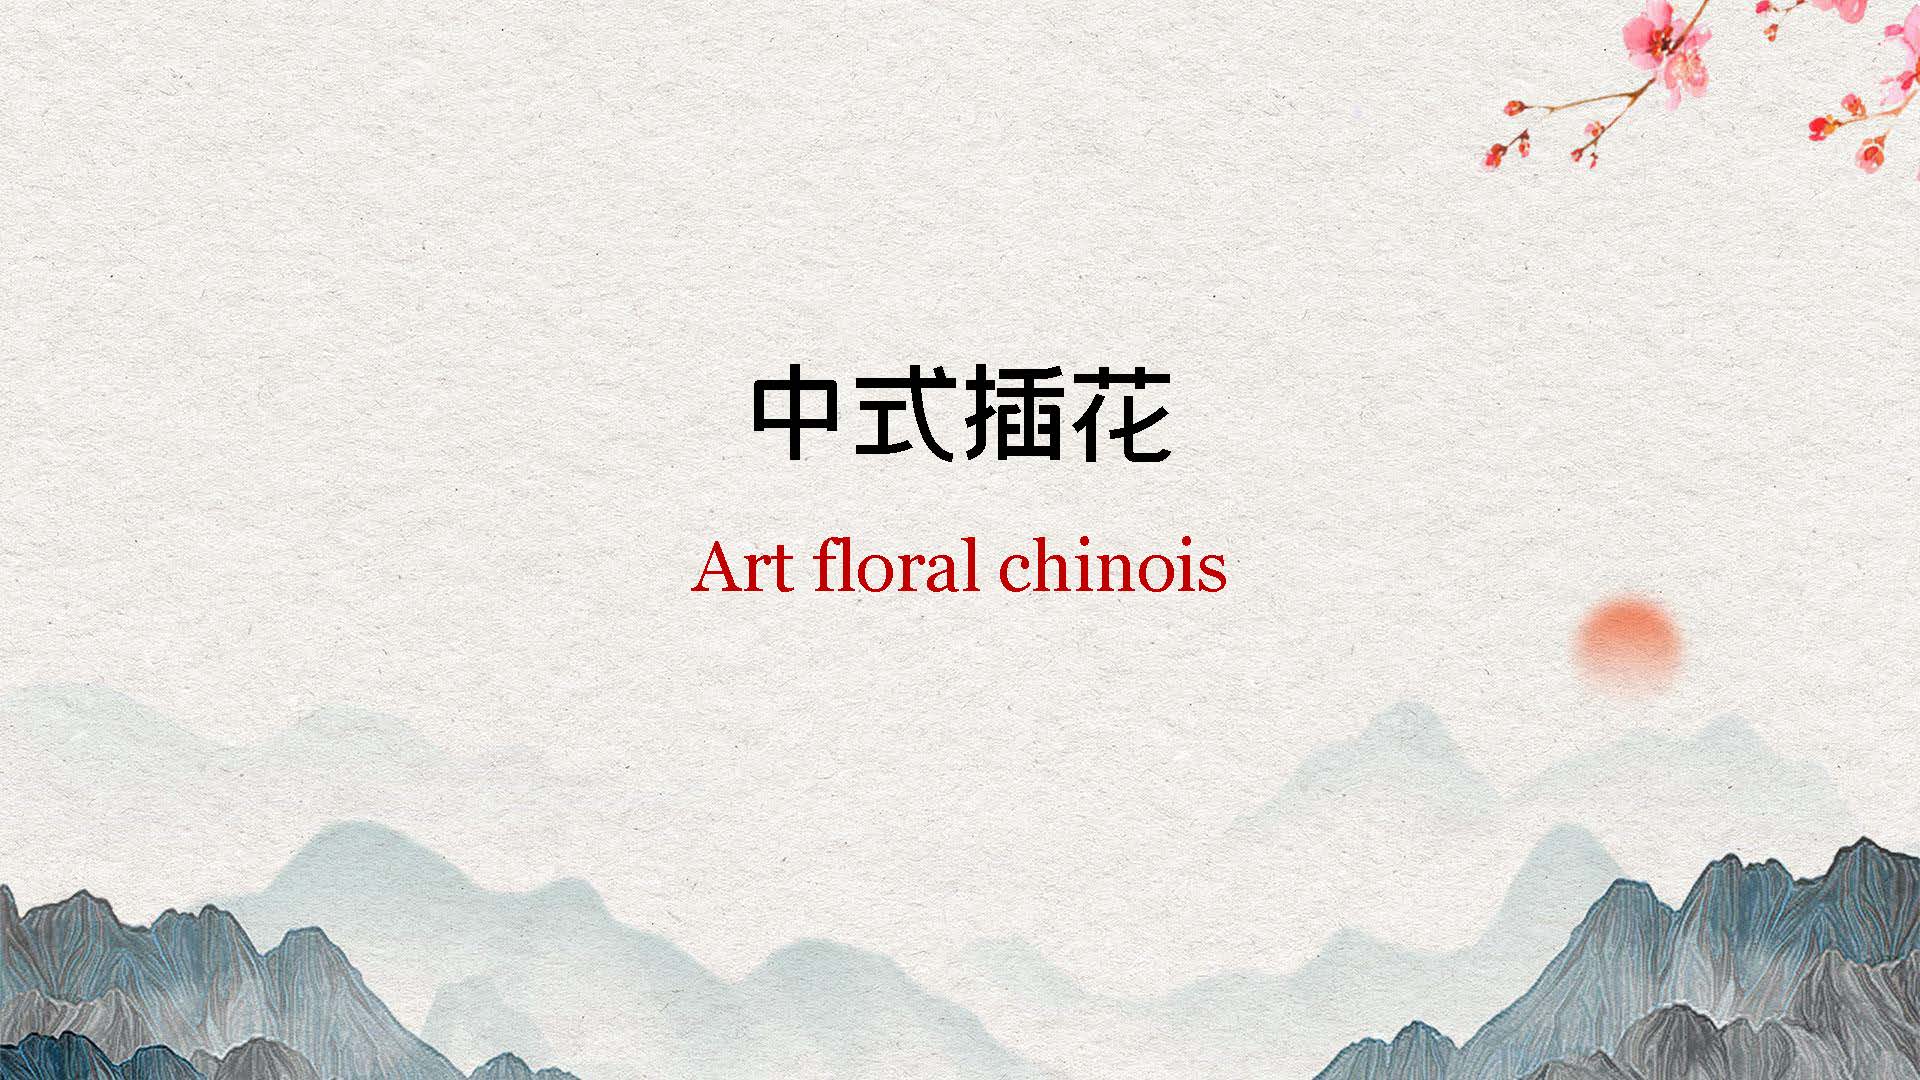 Art floral chinois